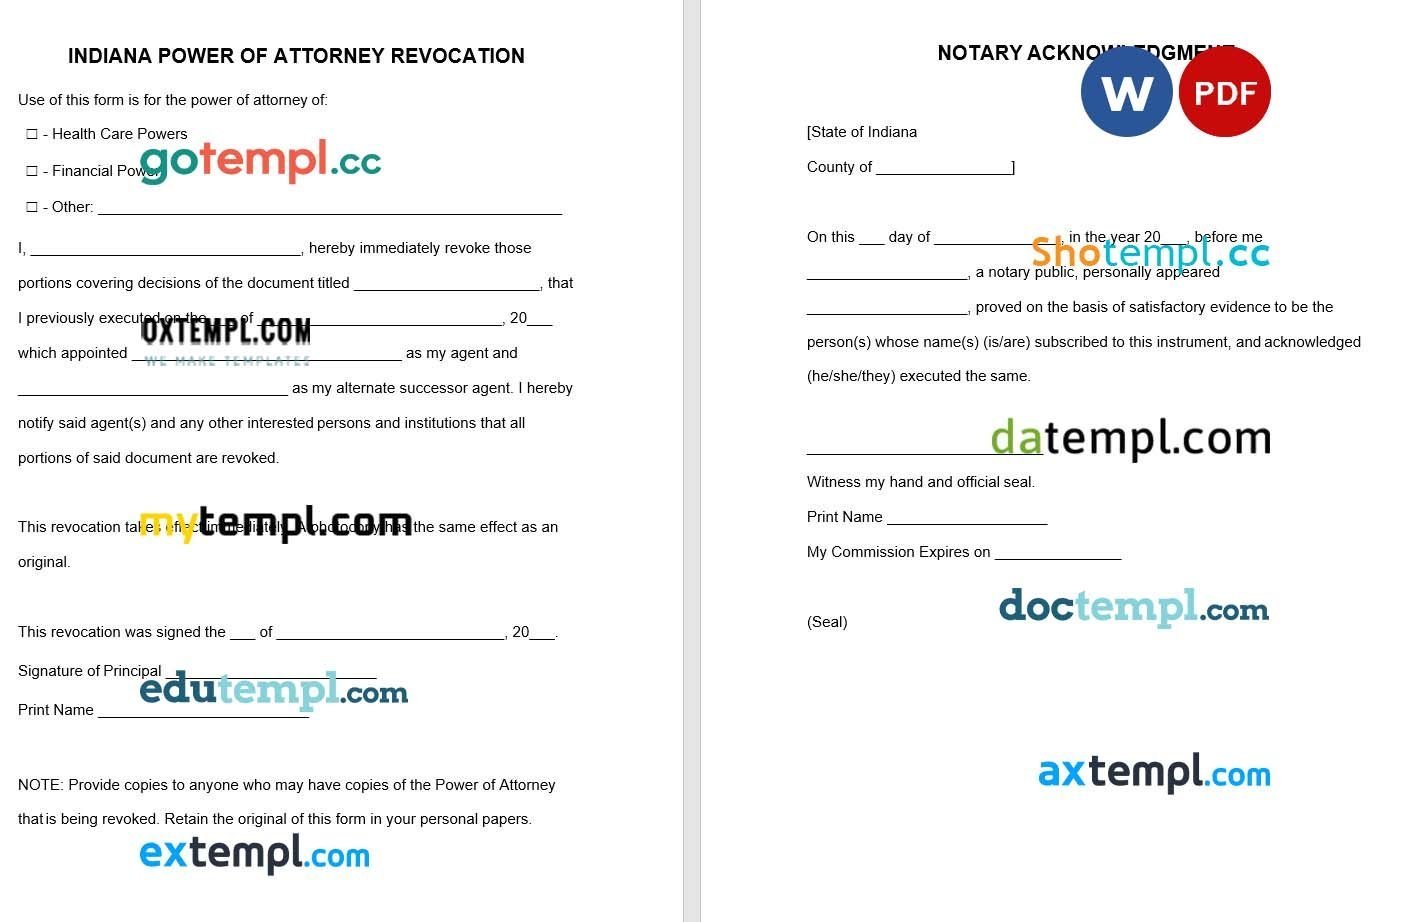 Indianna Power of Attorney Revocation Form example, fully editable